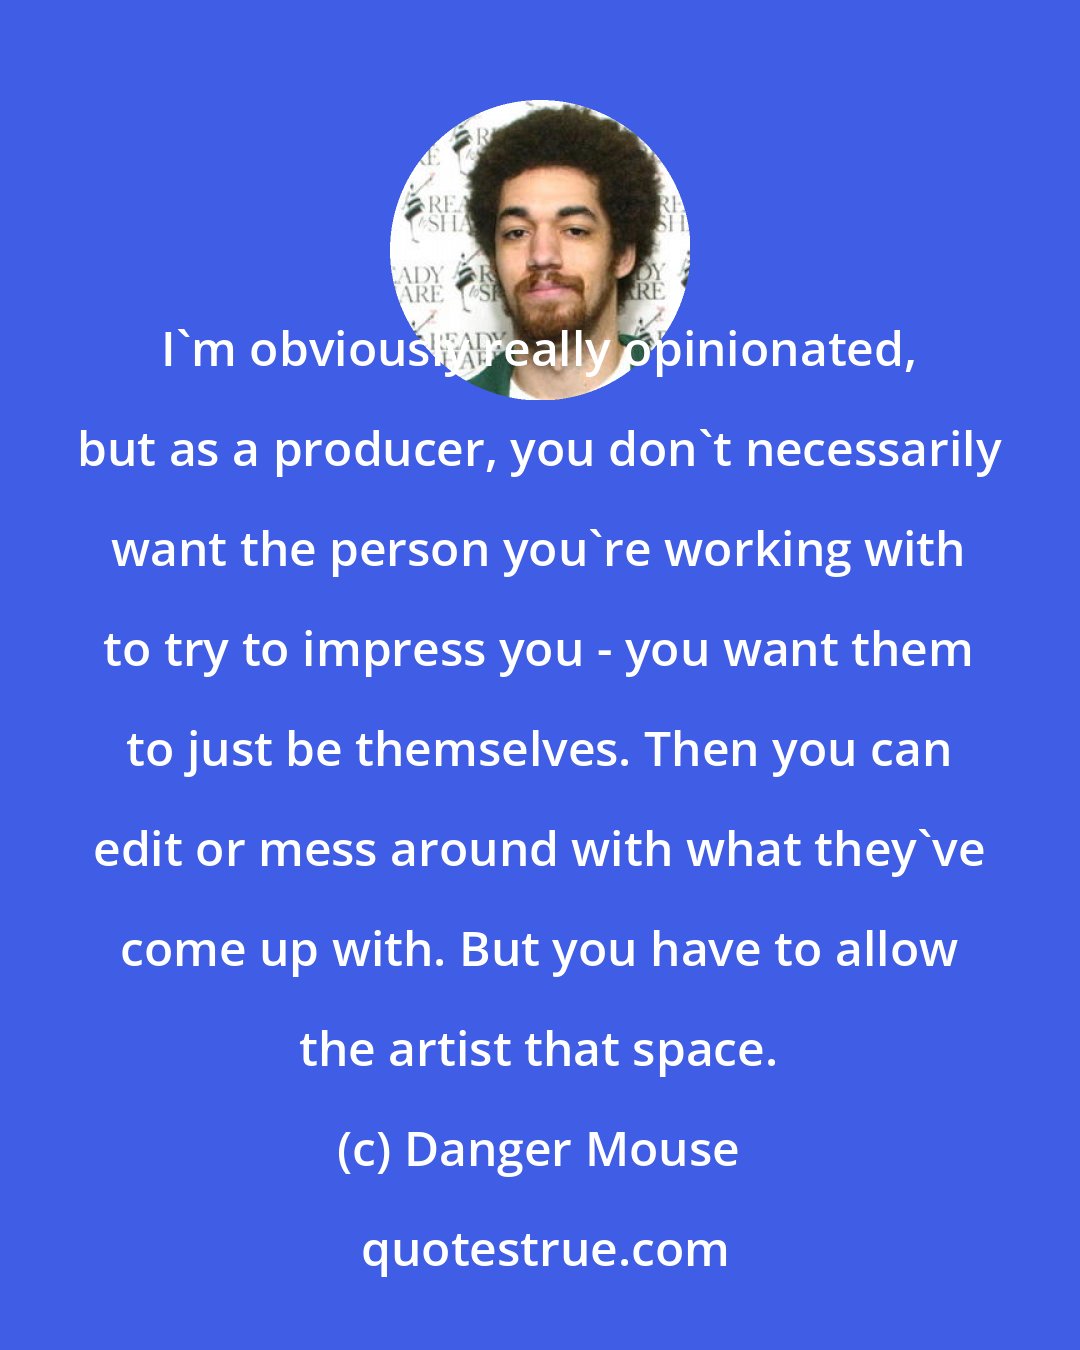 Danger Mouse: I'm obviously really opinionated, but as a producer, you don't necessarily want the person you're working with to try to impress you - you want them to just be themselves. Then you can edit or mess around with what they've come up with. But you have to allow the artist that space.